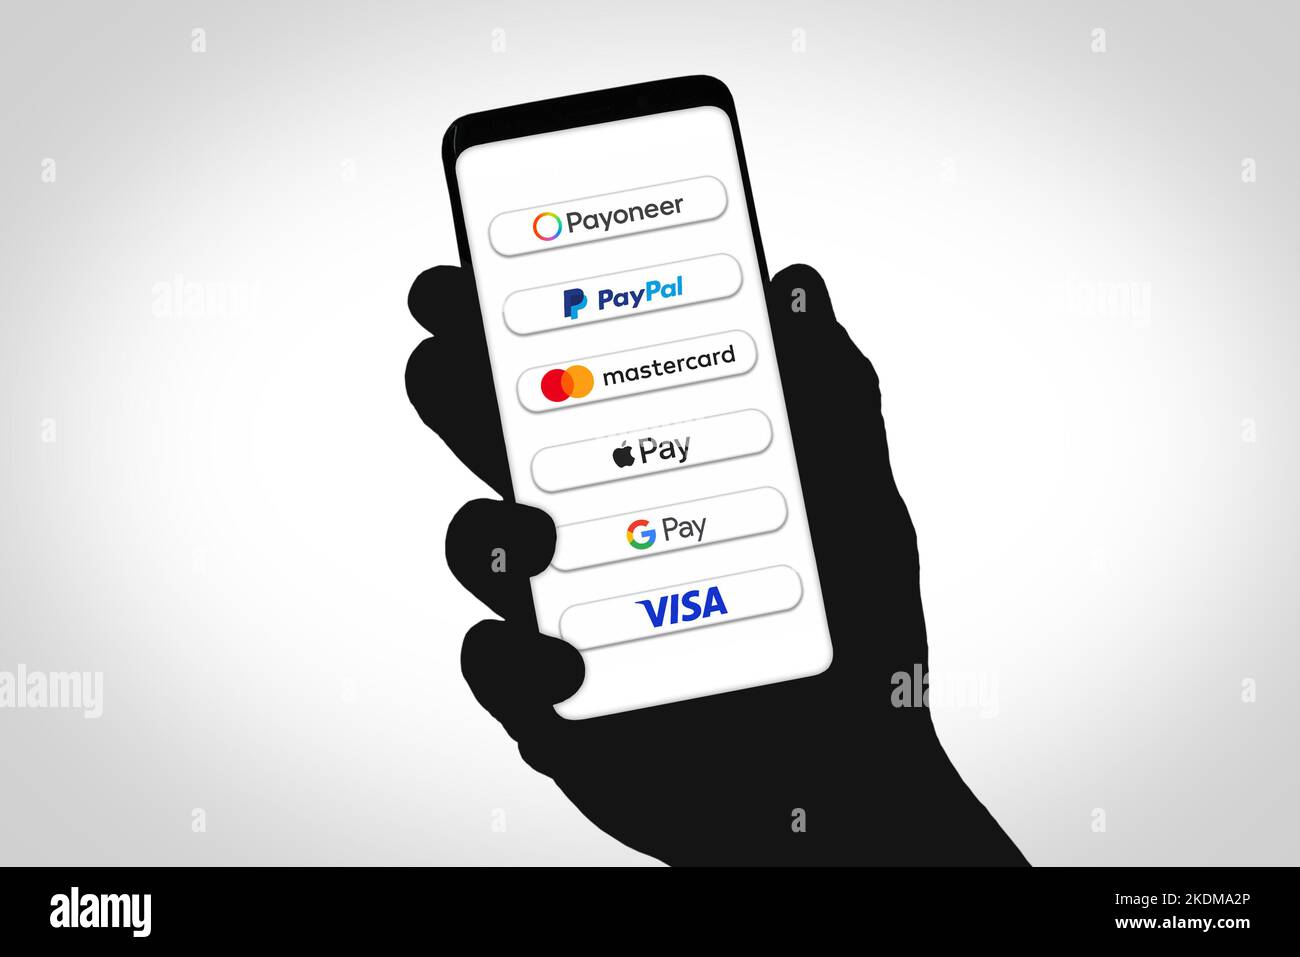 Payment System in America via Payoneer, Paypal, Mastercard, Apple Pay, Google Pay and Visa Stock Photo